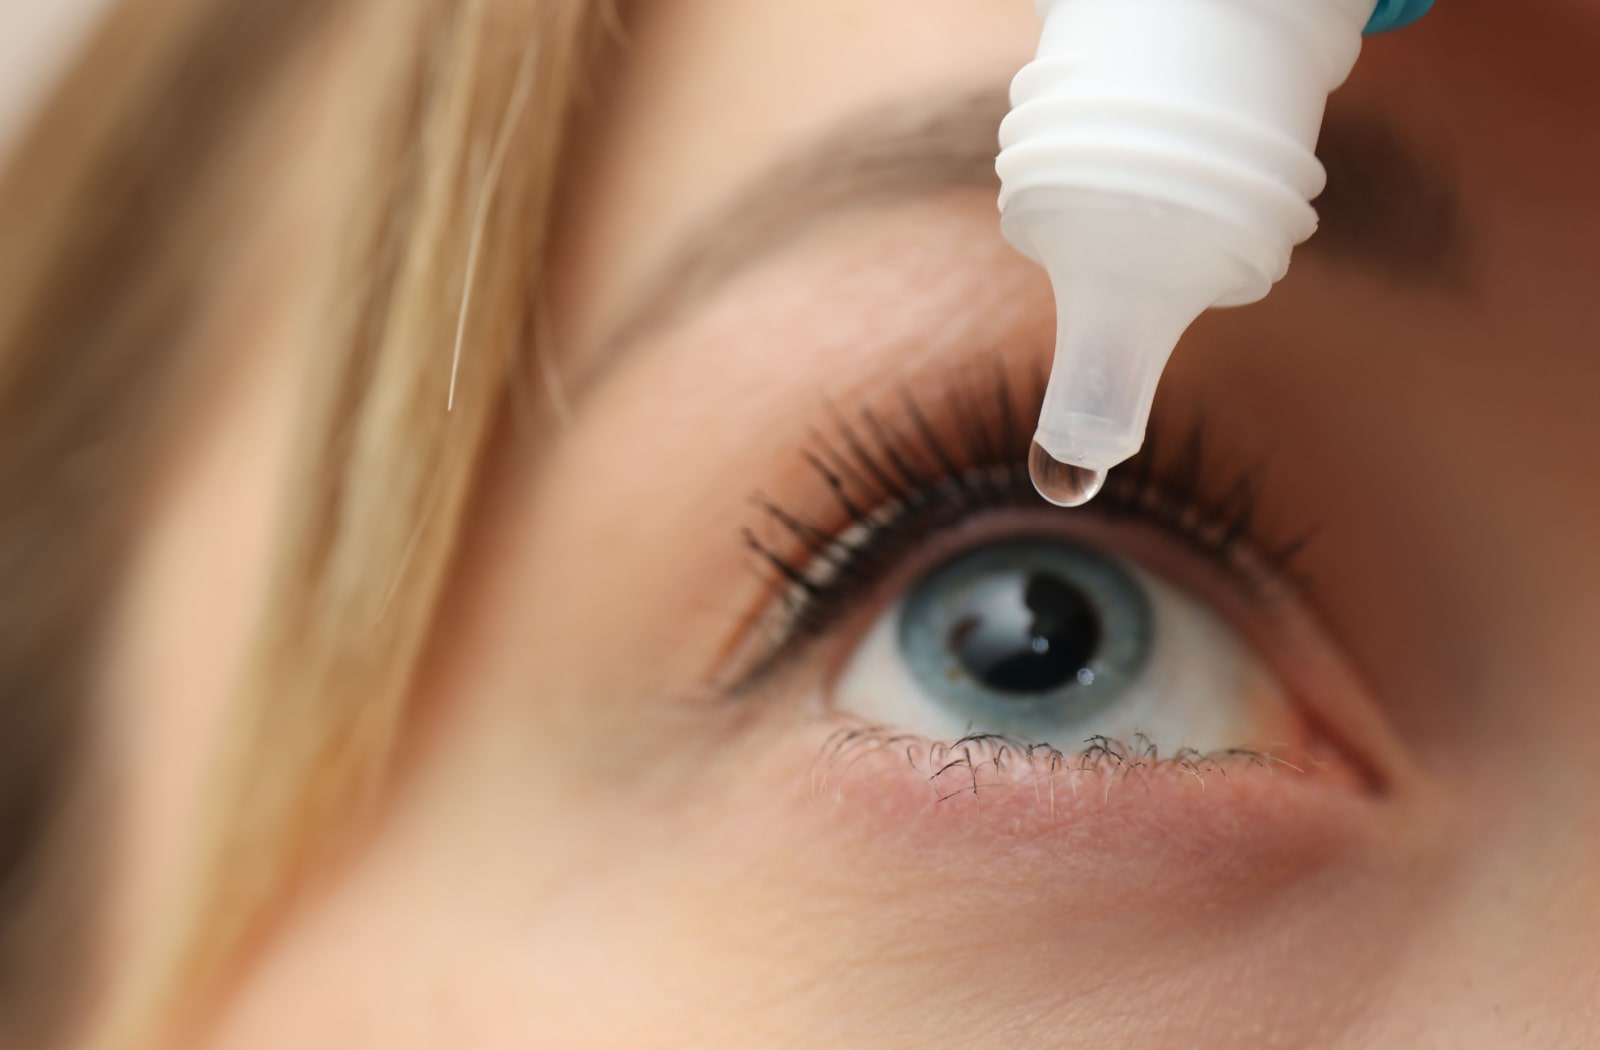 A close-up of a young woman using eye drops.